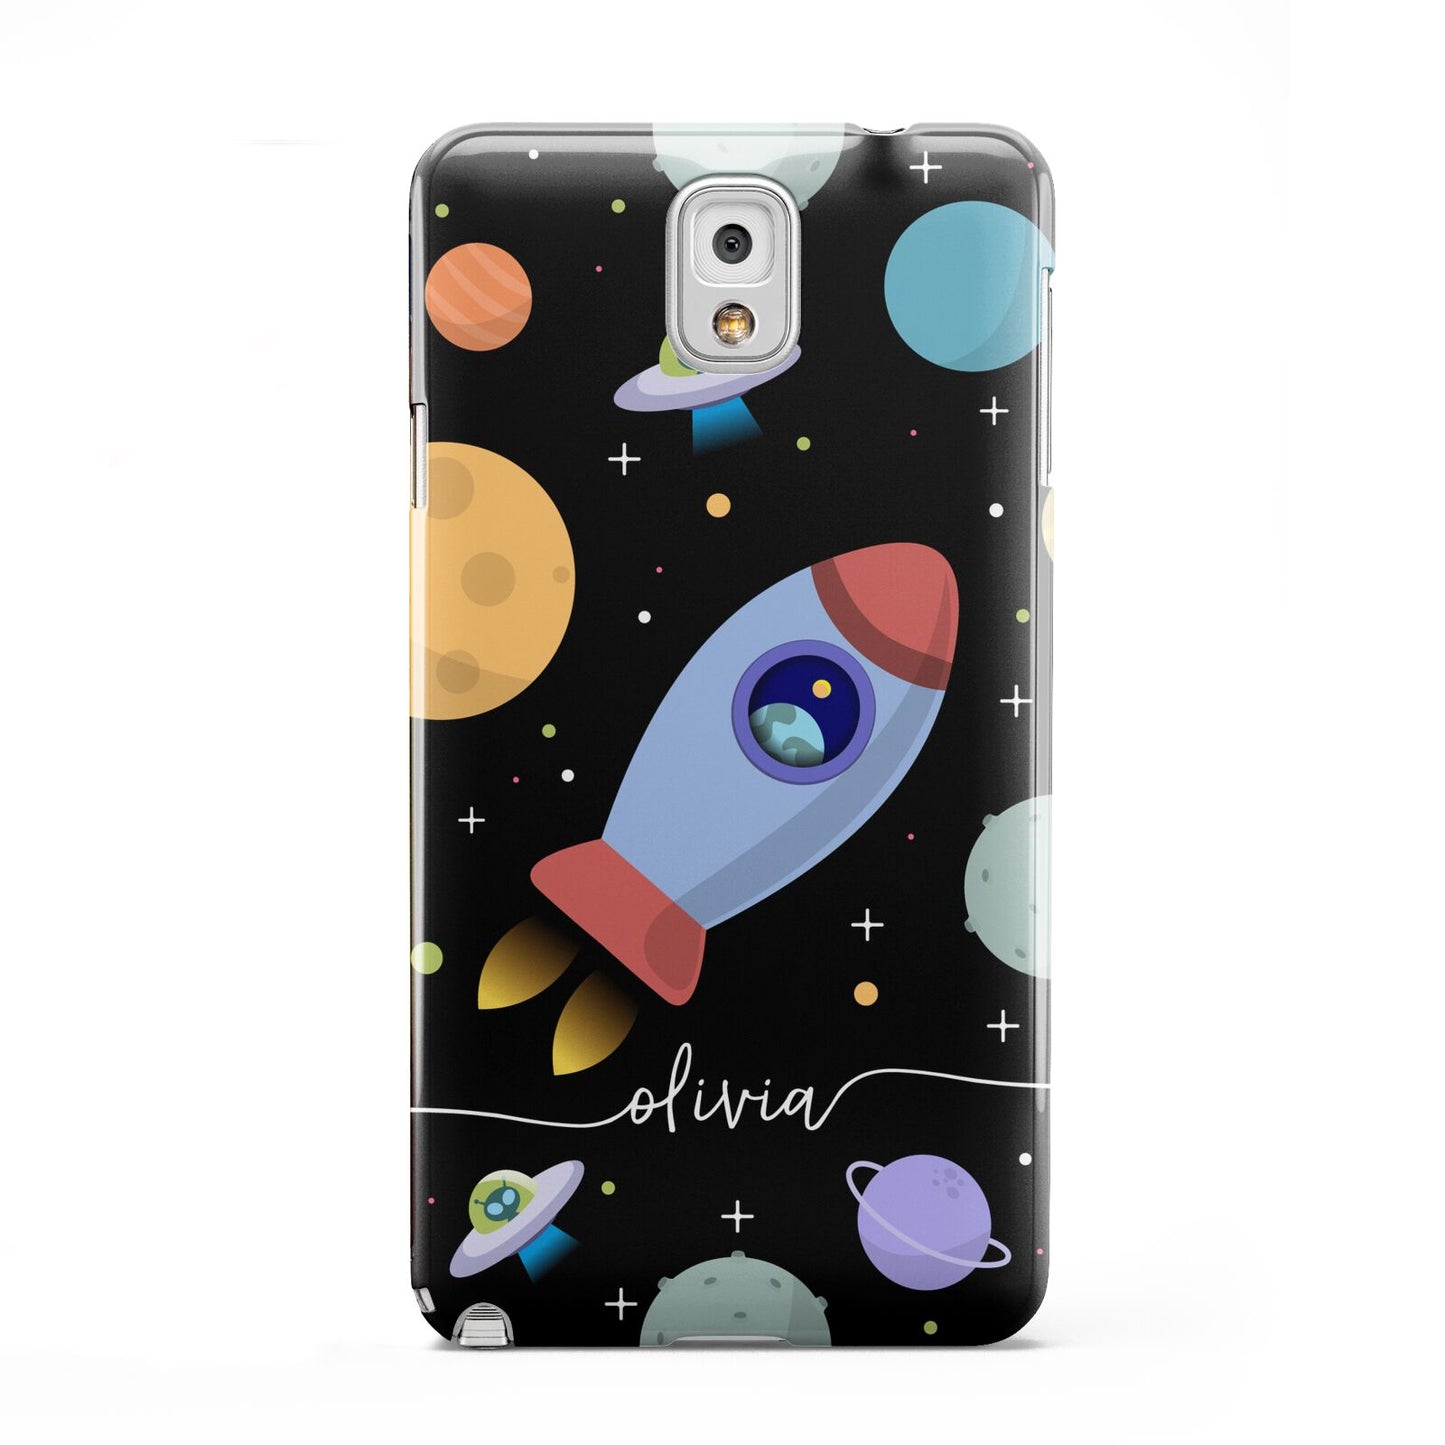 Fun Space Scene Artwork with Name Samsung Galaxy Note 3 Case